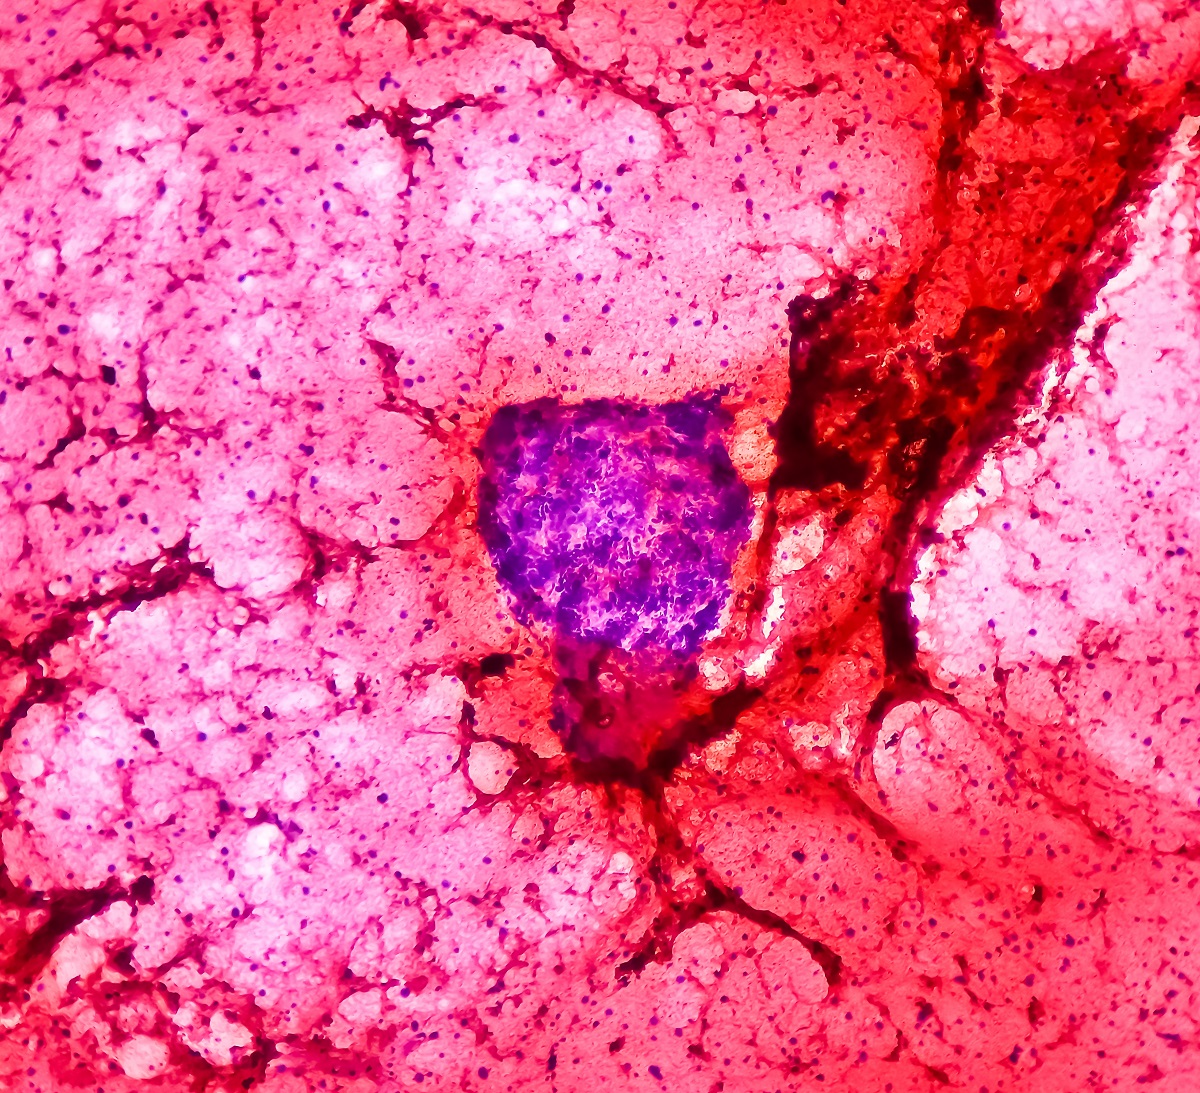 Photomicrograph of Osteolytic Lesion of Left Proximal Radius